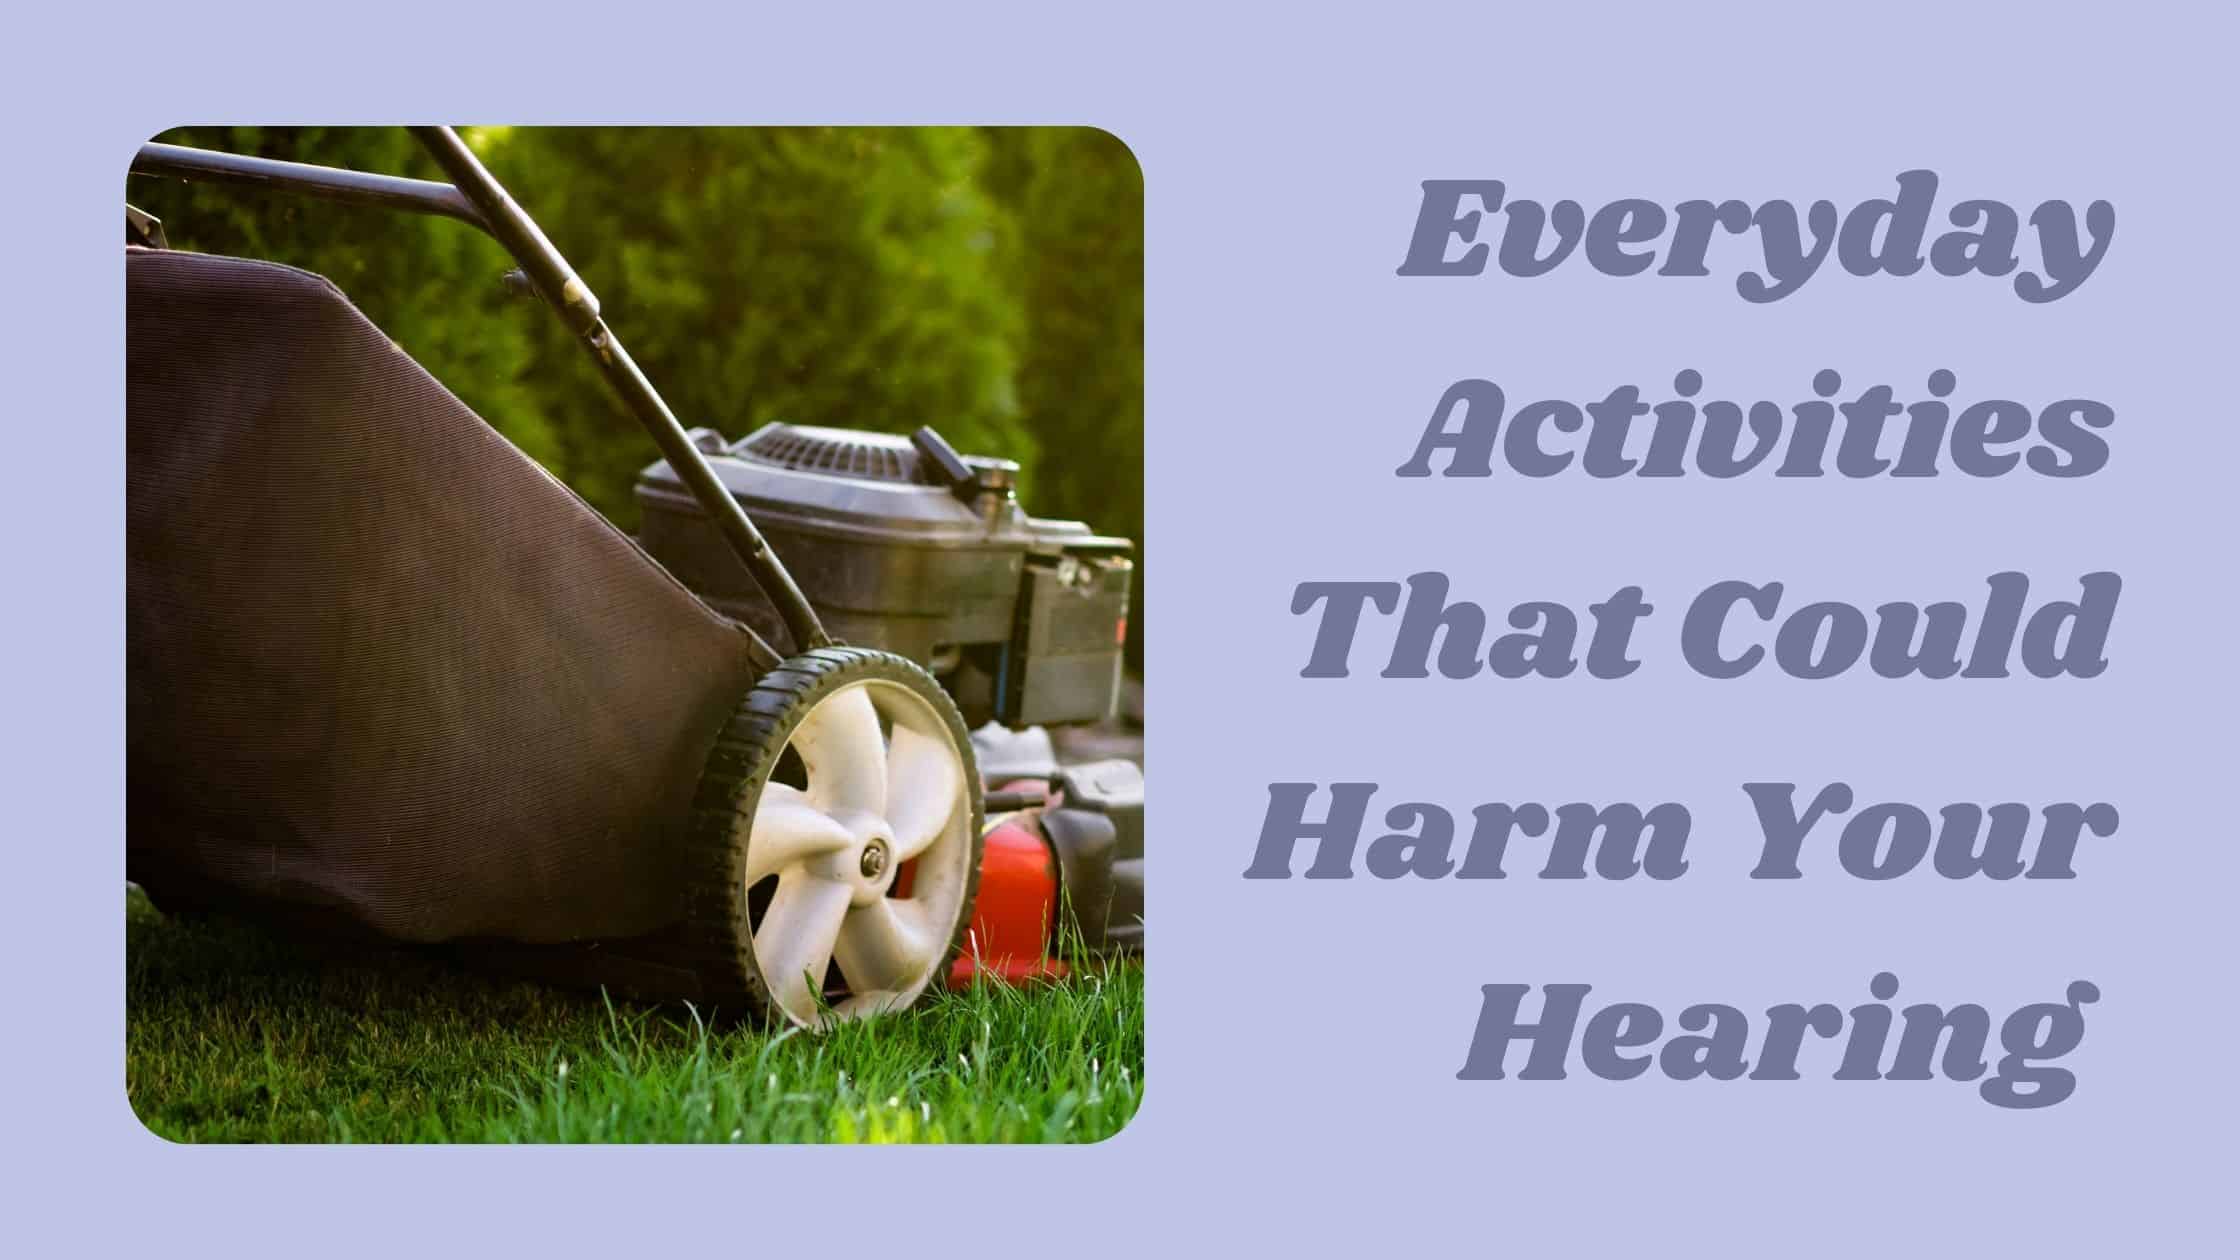 Featured image for “Everyday Activities That Could Harm Your Hearing”